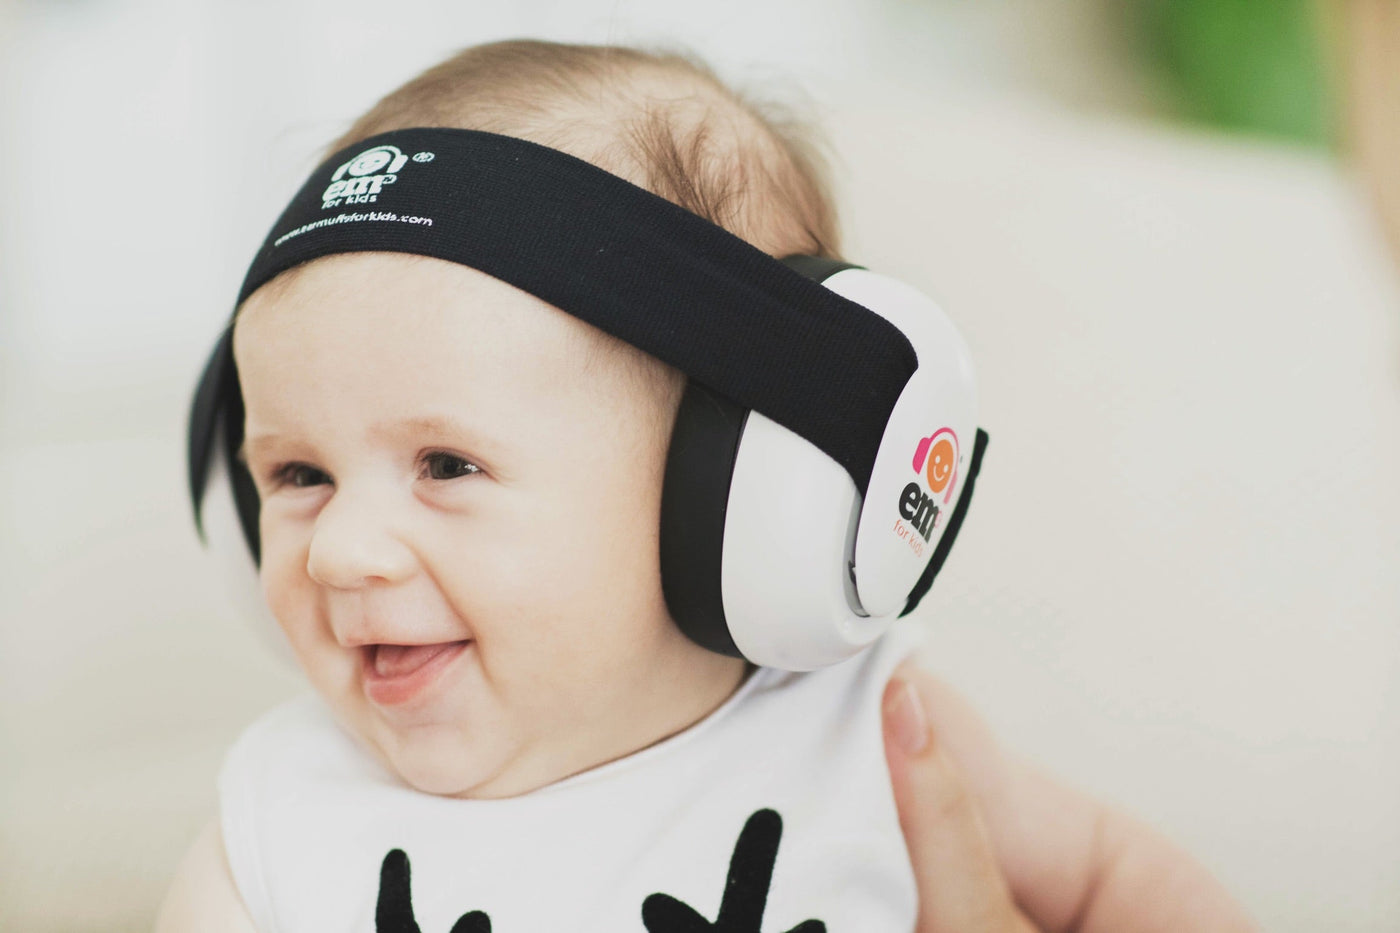 Baby with Ems for Kids ear muffs on